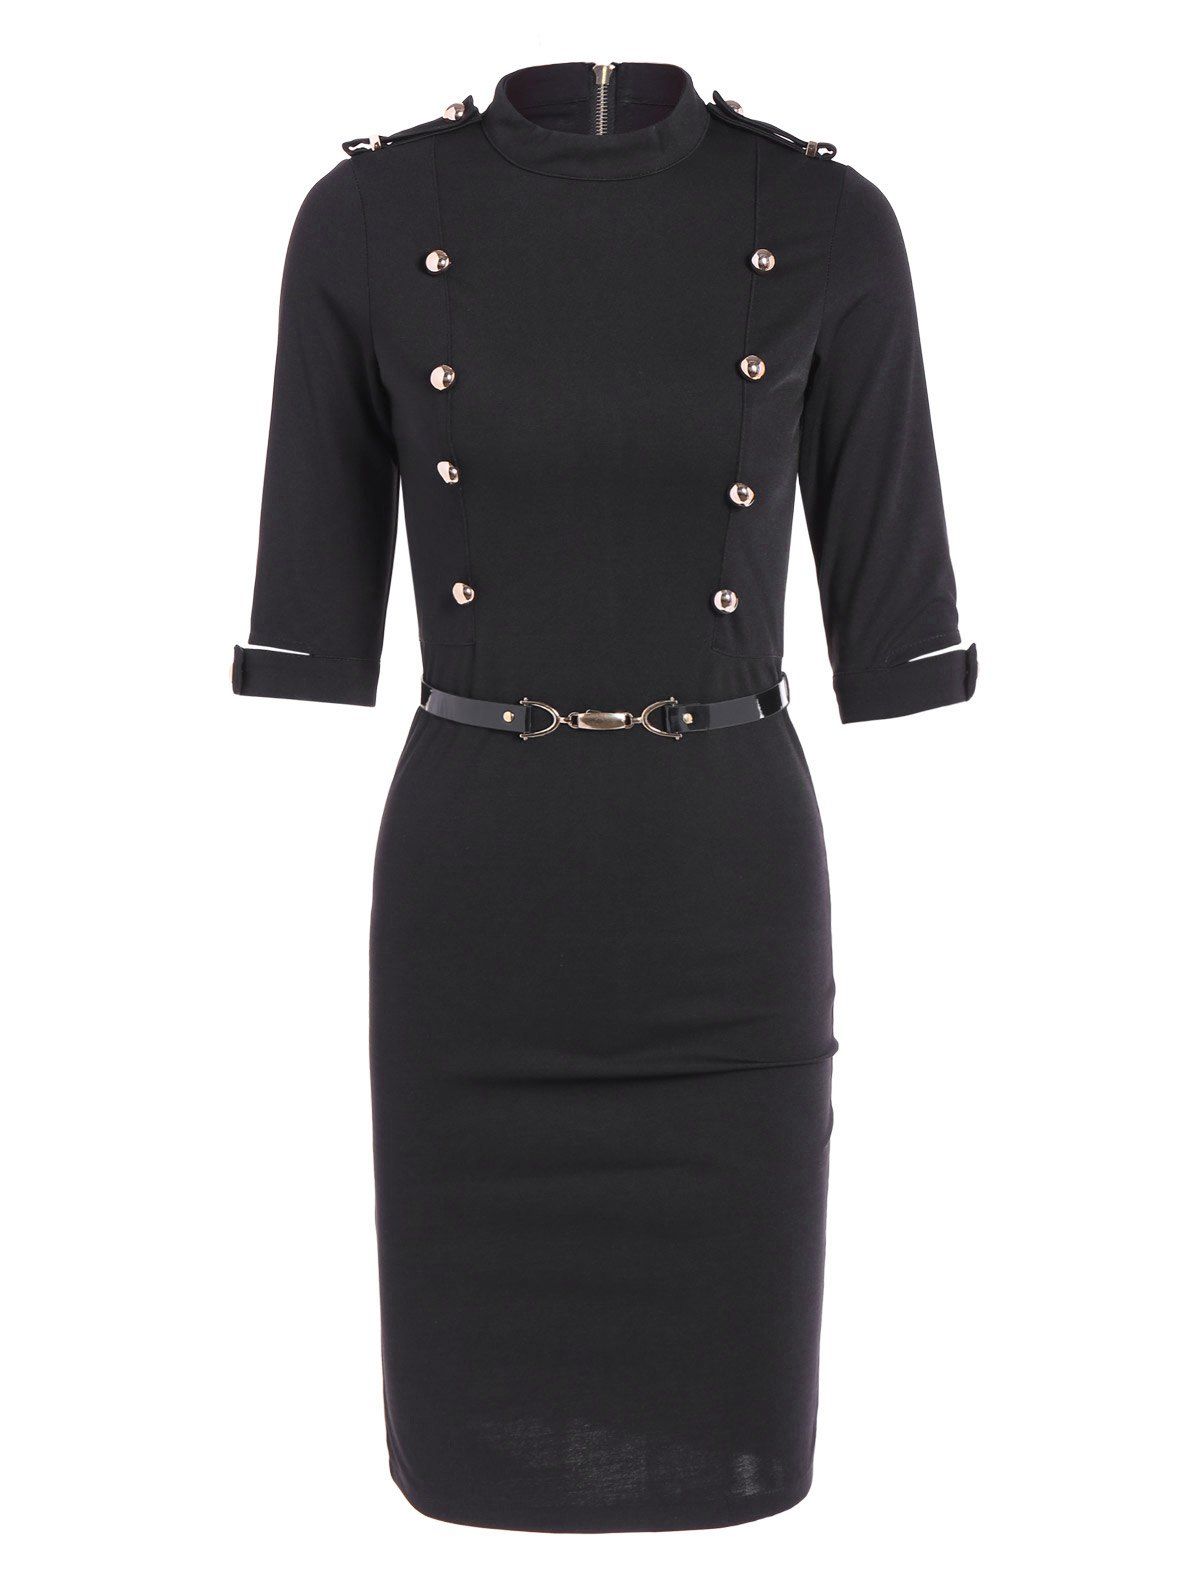 17 Off 2021 Buttoned Belted Bodycon Sheath Dress In Black Dresslily